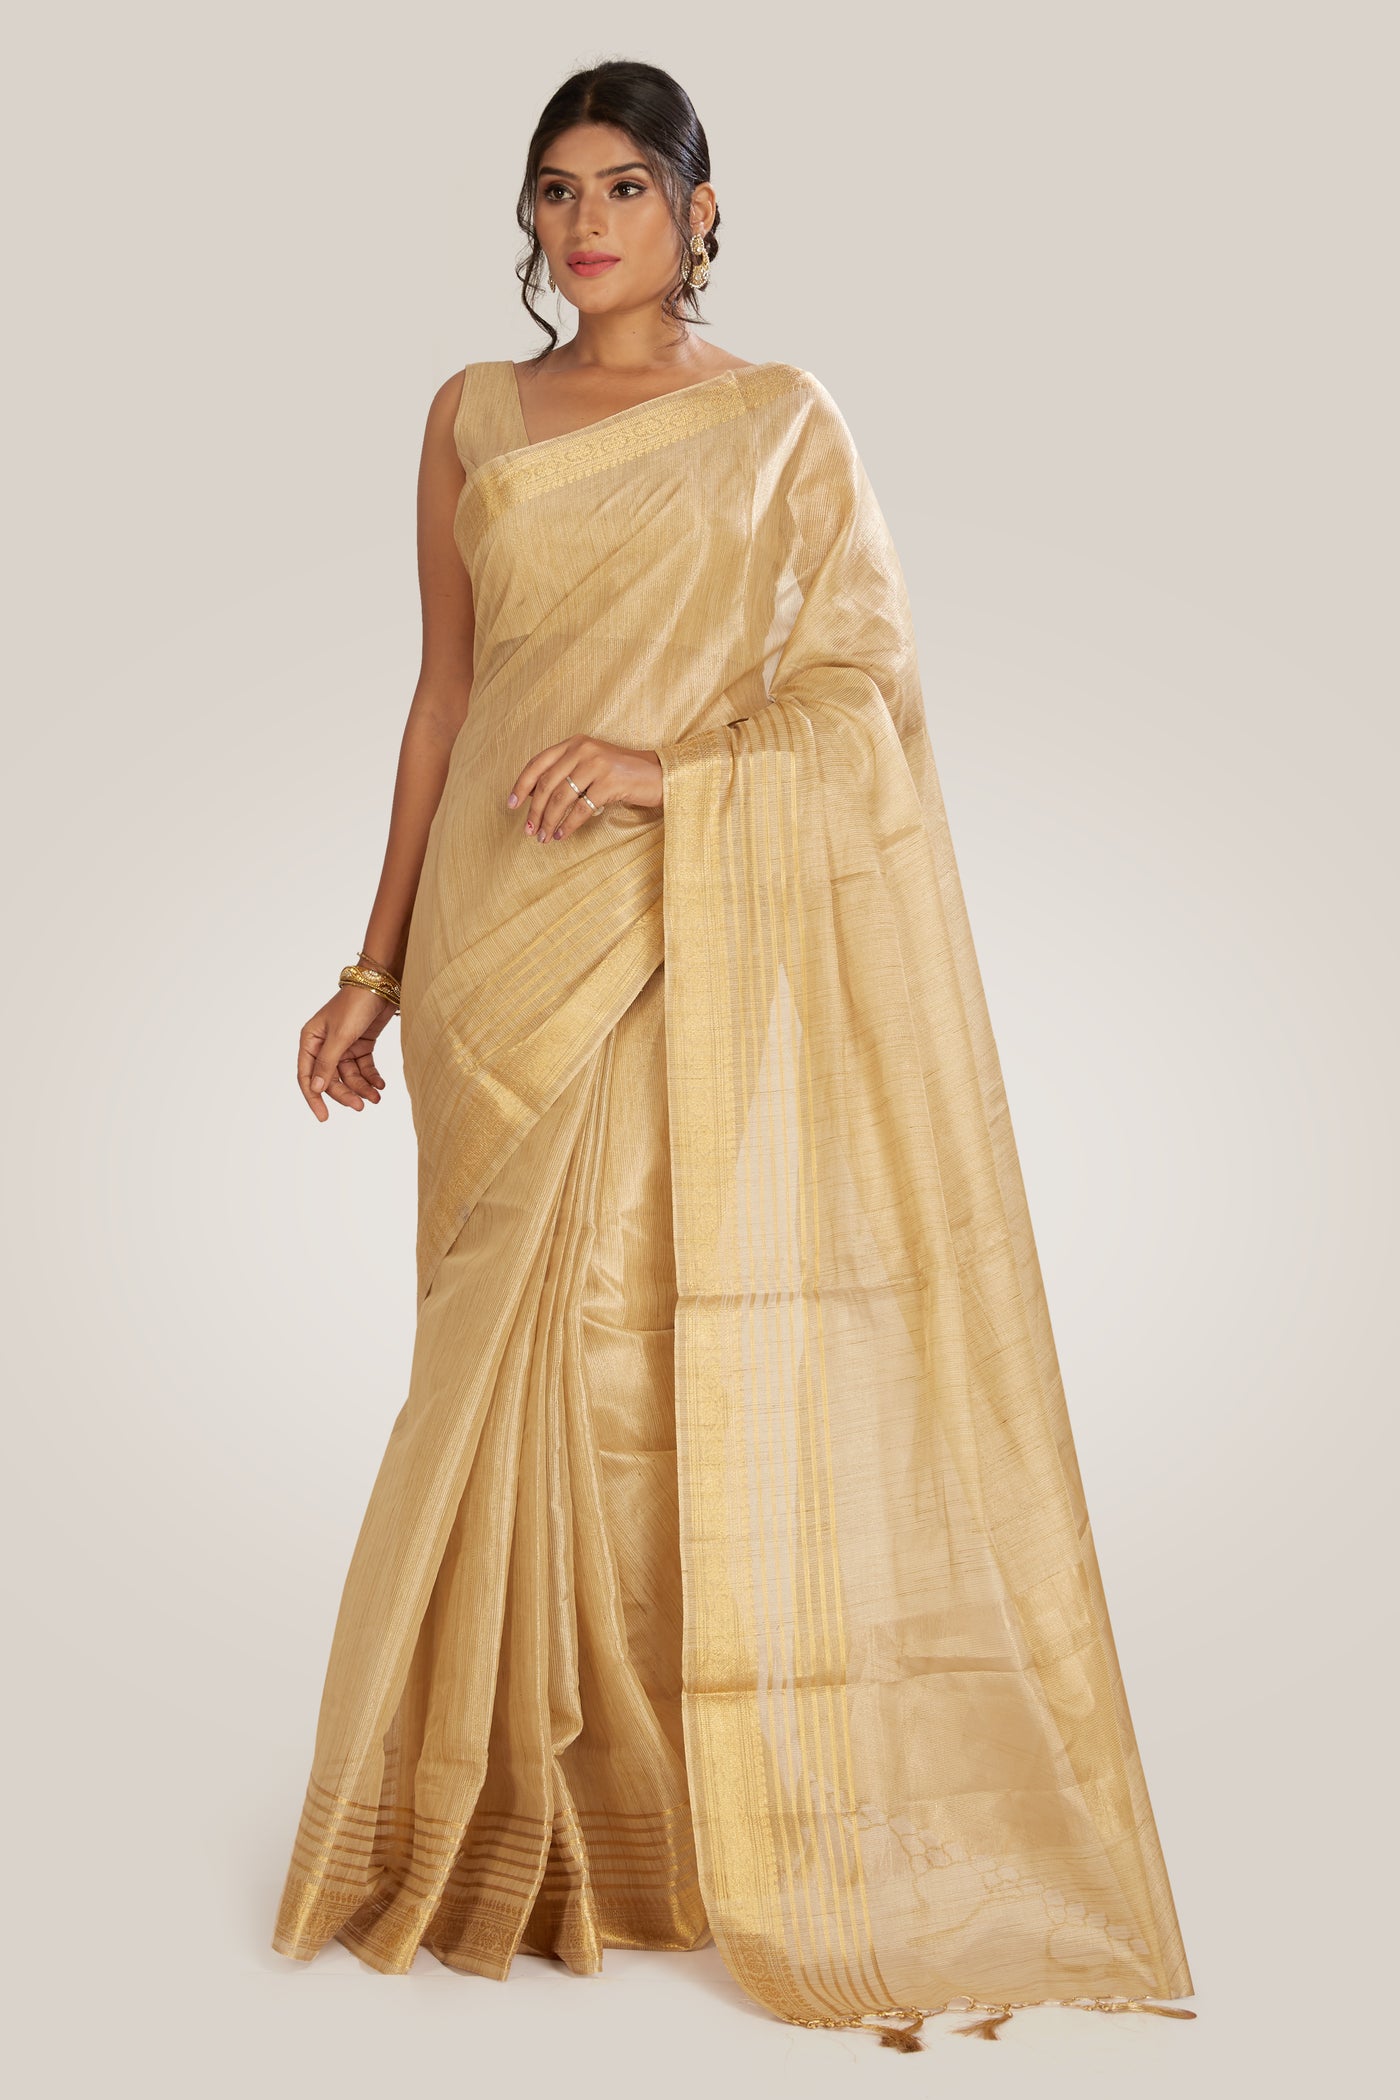 Butterscotch Gold Saree - Indian Clothing in Denver, CO, Aurora, CO, Boulder, CO, Fort Collins, CO, Colorado Springs, CO, Parker, CO, Highlands Ranch, CO, Cherry Creek, CO, Centennial, CO, and Longmont, CO. Nationwide shipping USA - India Fashion X